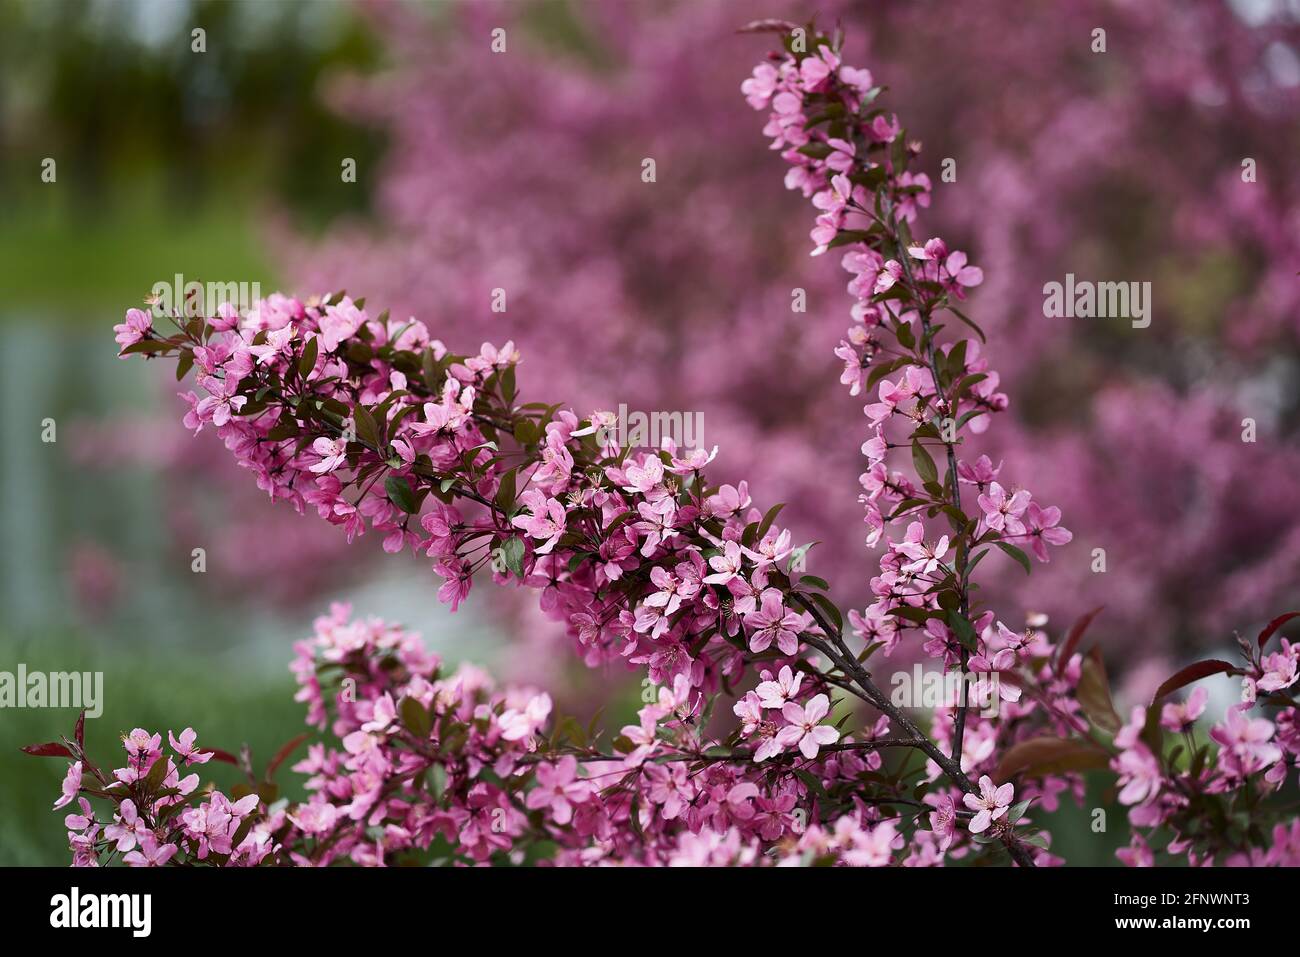 boughs arching from the weight of small pink flowers . Focus on the foreground. Stock Photo